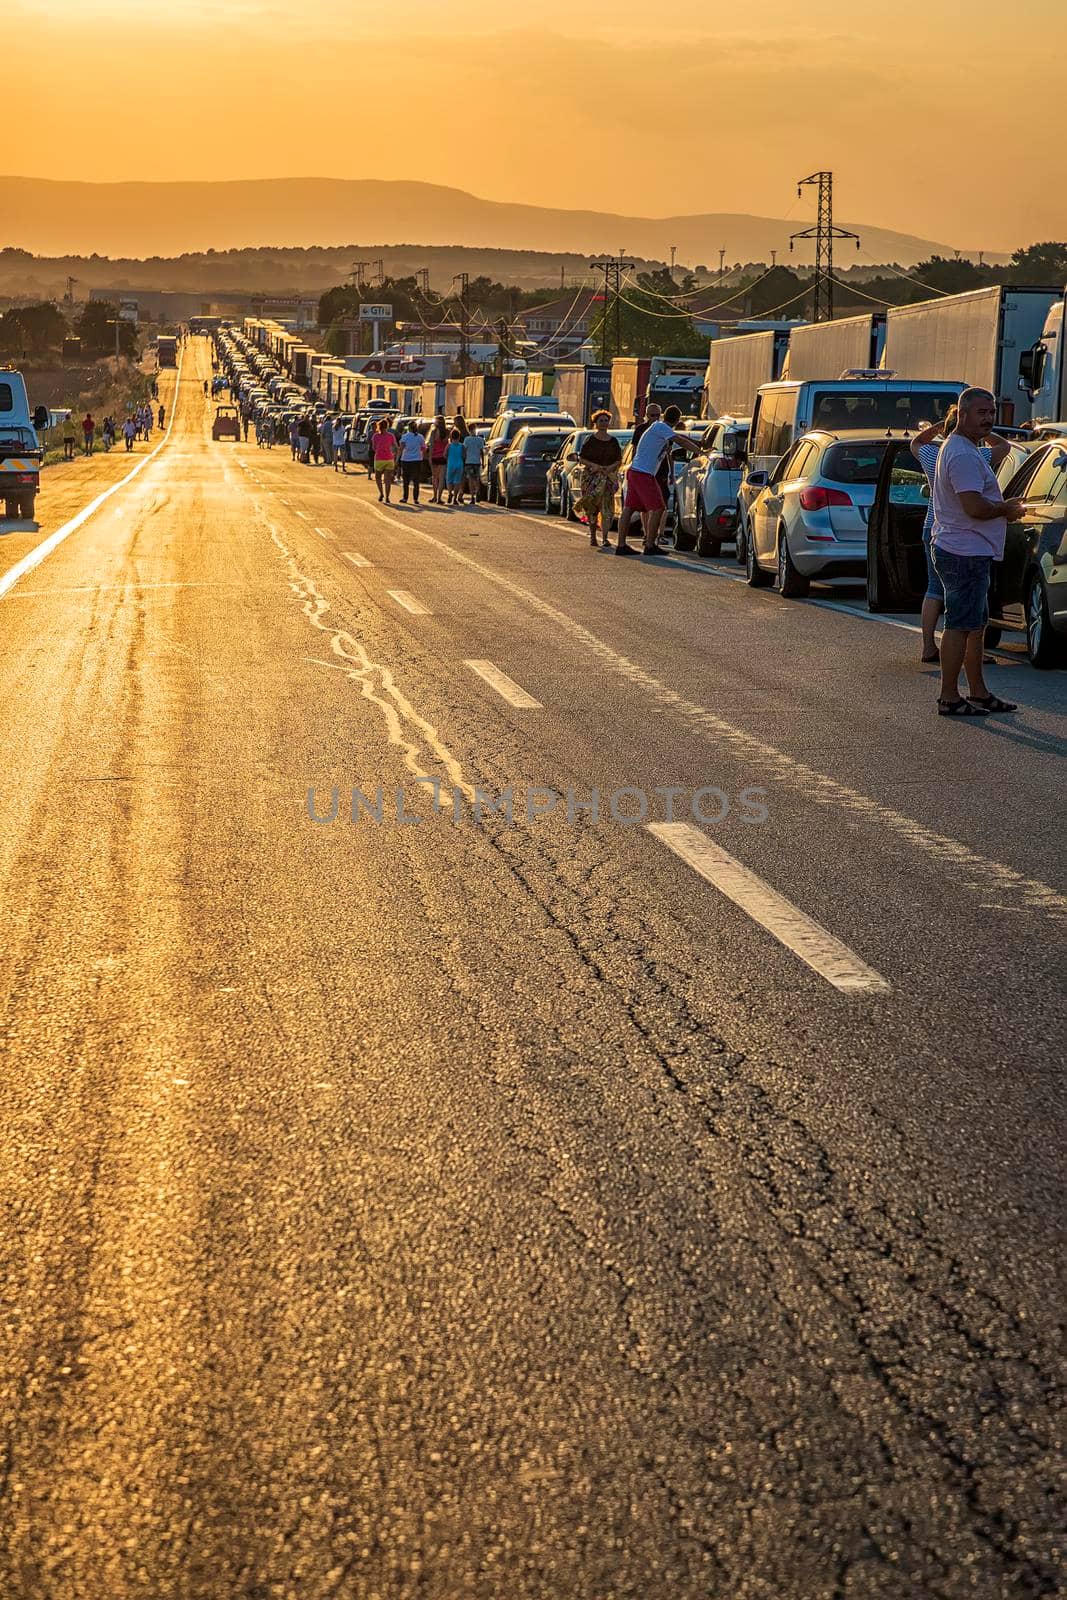 Turkey Border, Turkey - August 30, 2019. Trucks and cars waiting in long lines to cross the international border 